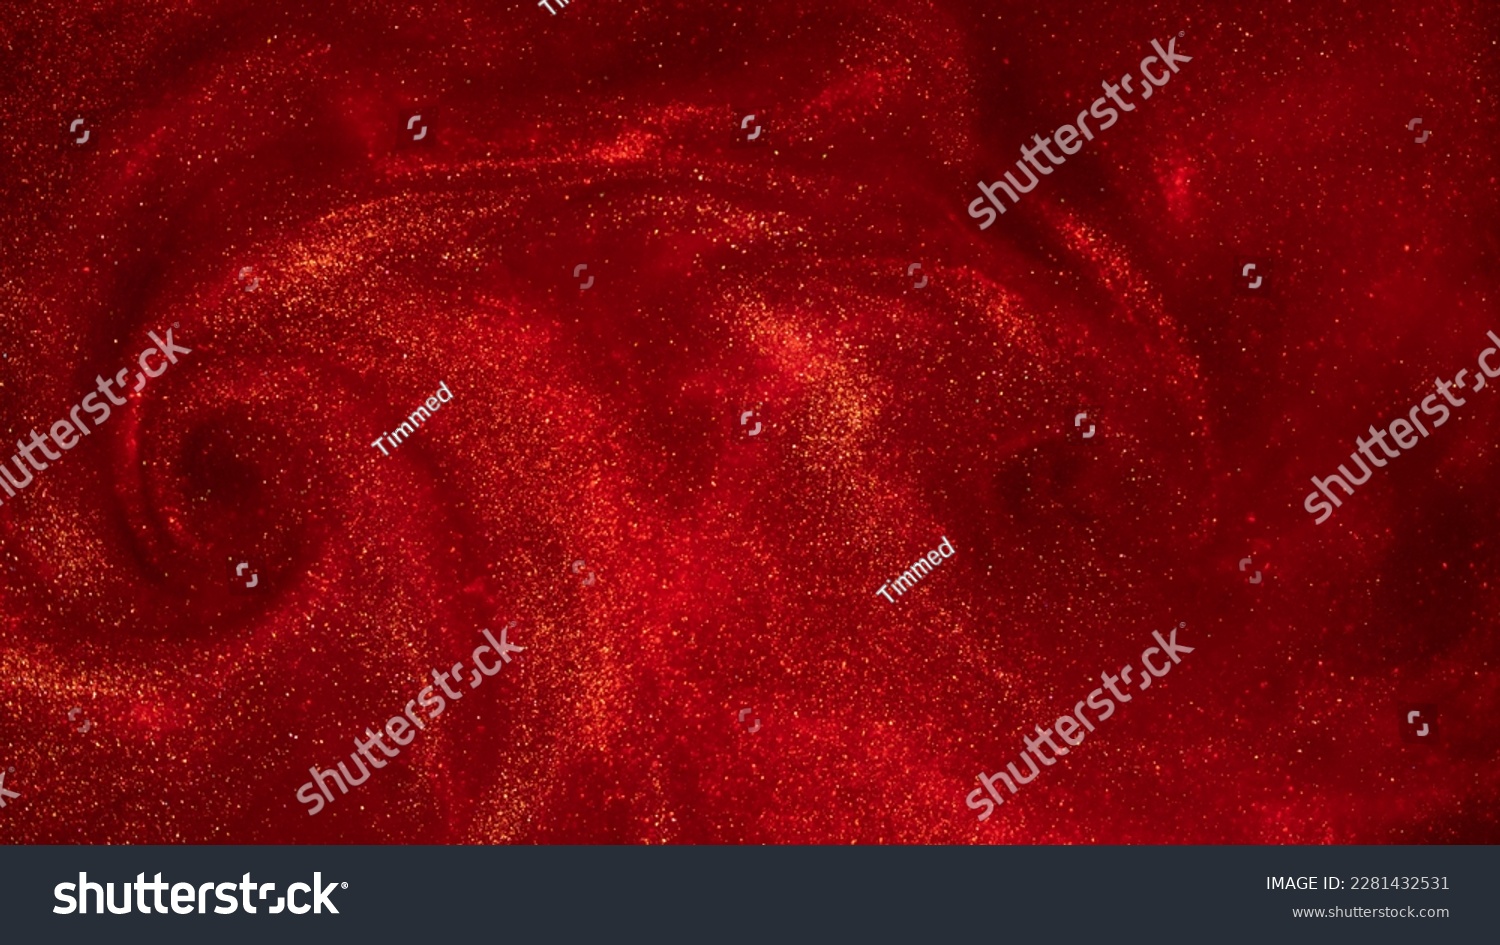 Magic sparkling glitter in red background. Golden dust particles create curve patterns with depth of field on red background. Golden Particles in red fluid absatrct backdrop. #2281432531